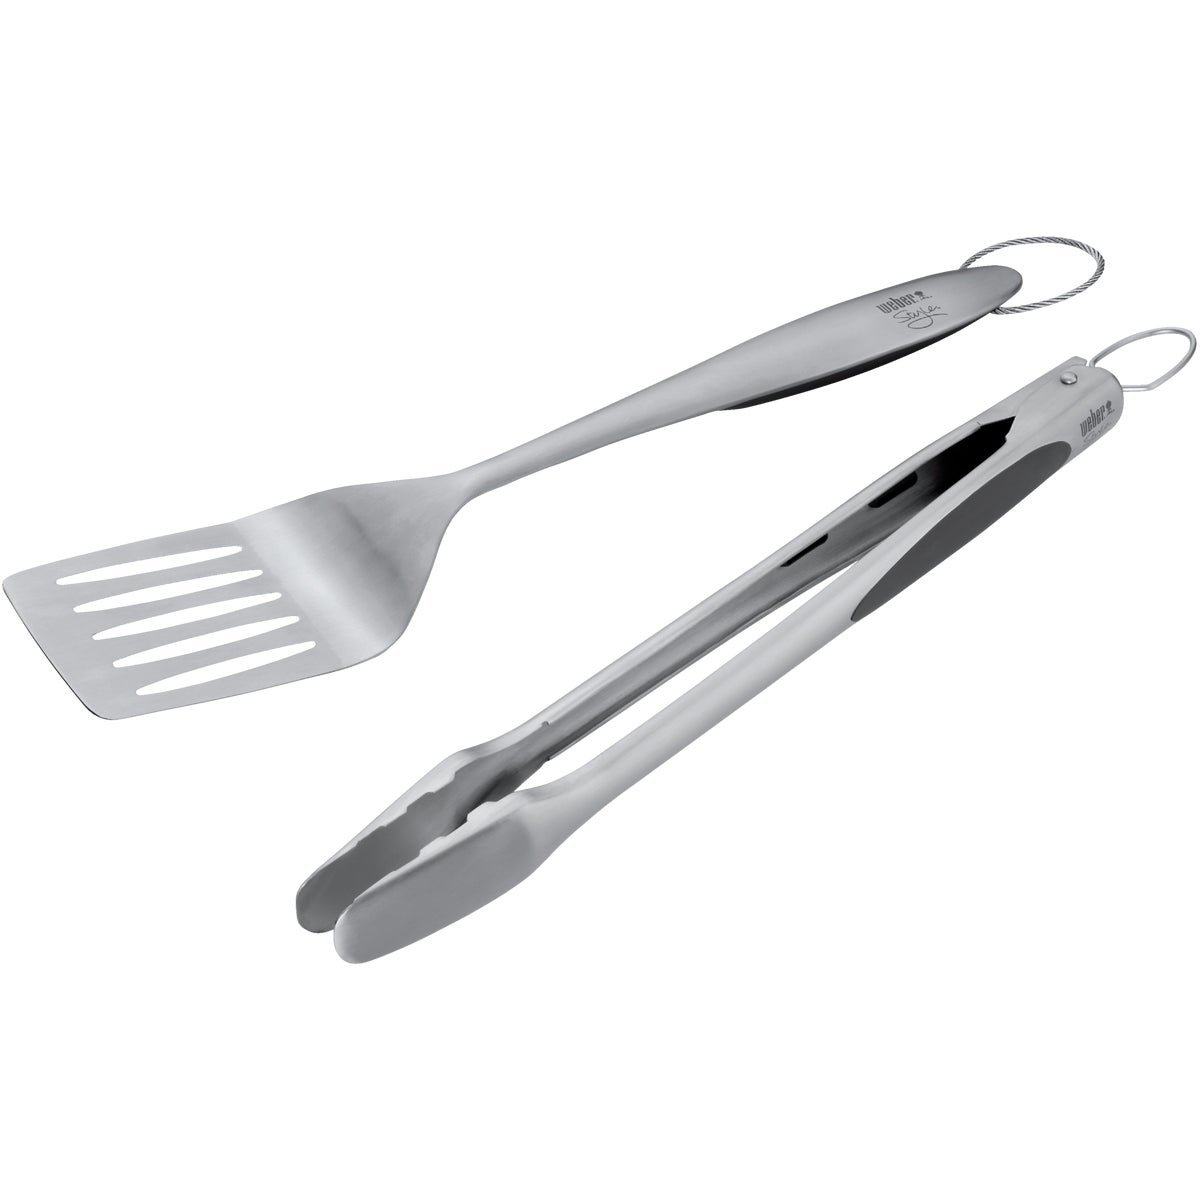 Item 800836, Weber style stainless steel barbeque tool set which includes 1 set of tongs